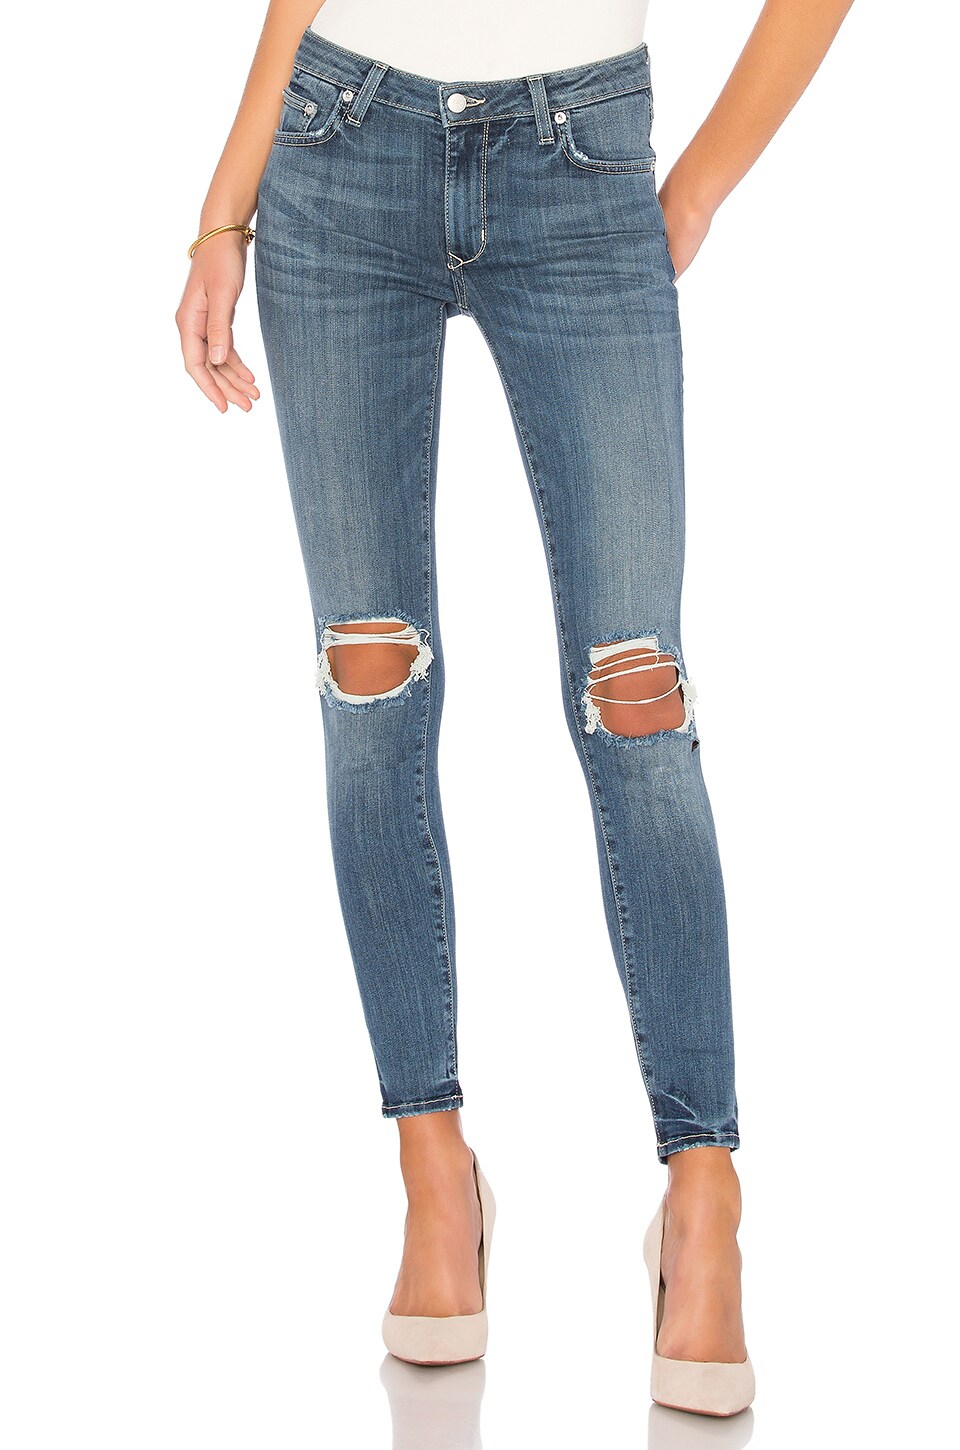 lovers and friends ricky skinny jean